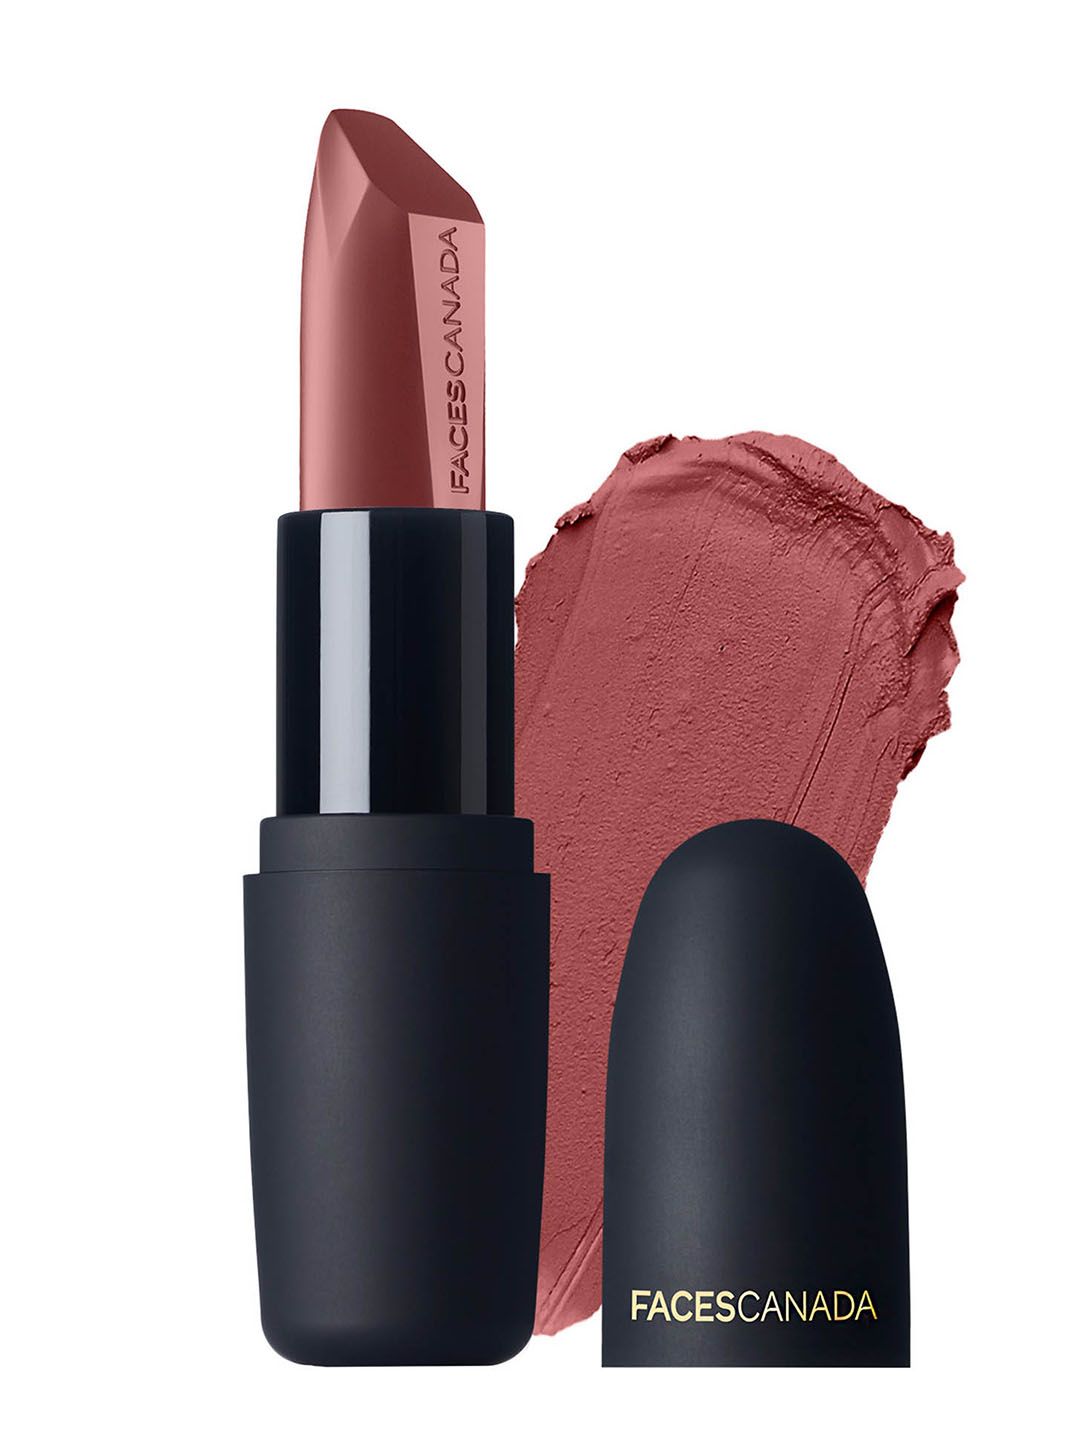 Faces Canada Weightless Matte Hydrating Lipstick with Almond Oil - Divine Mauve 17 Price in India